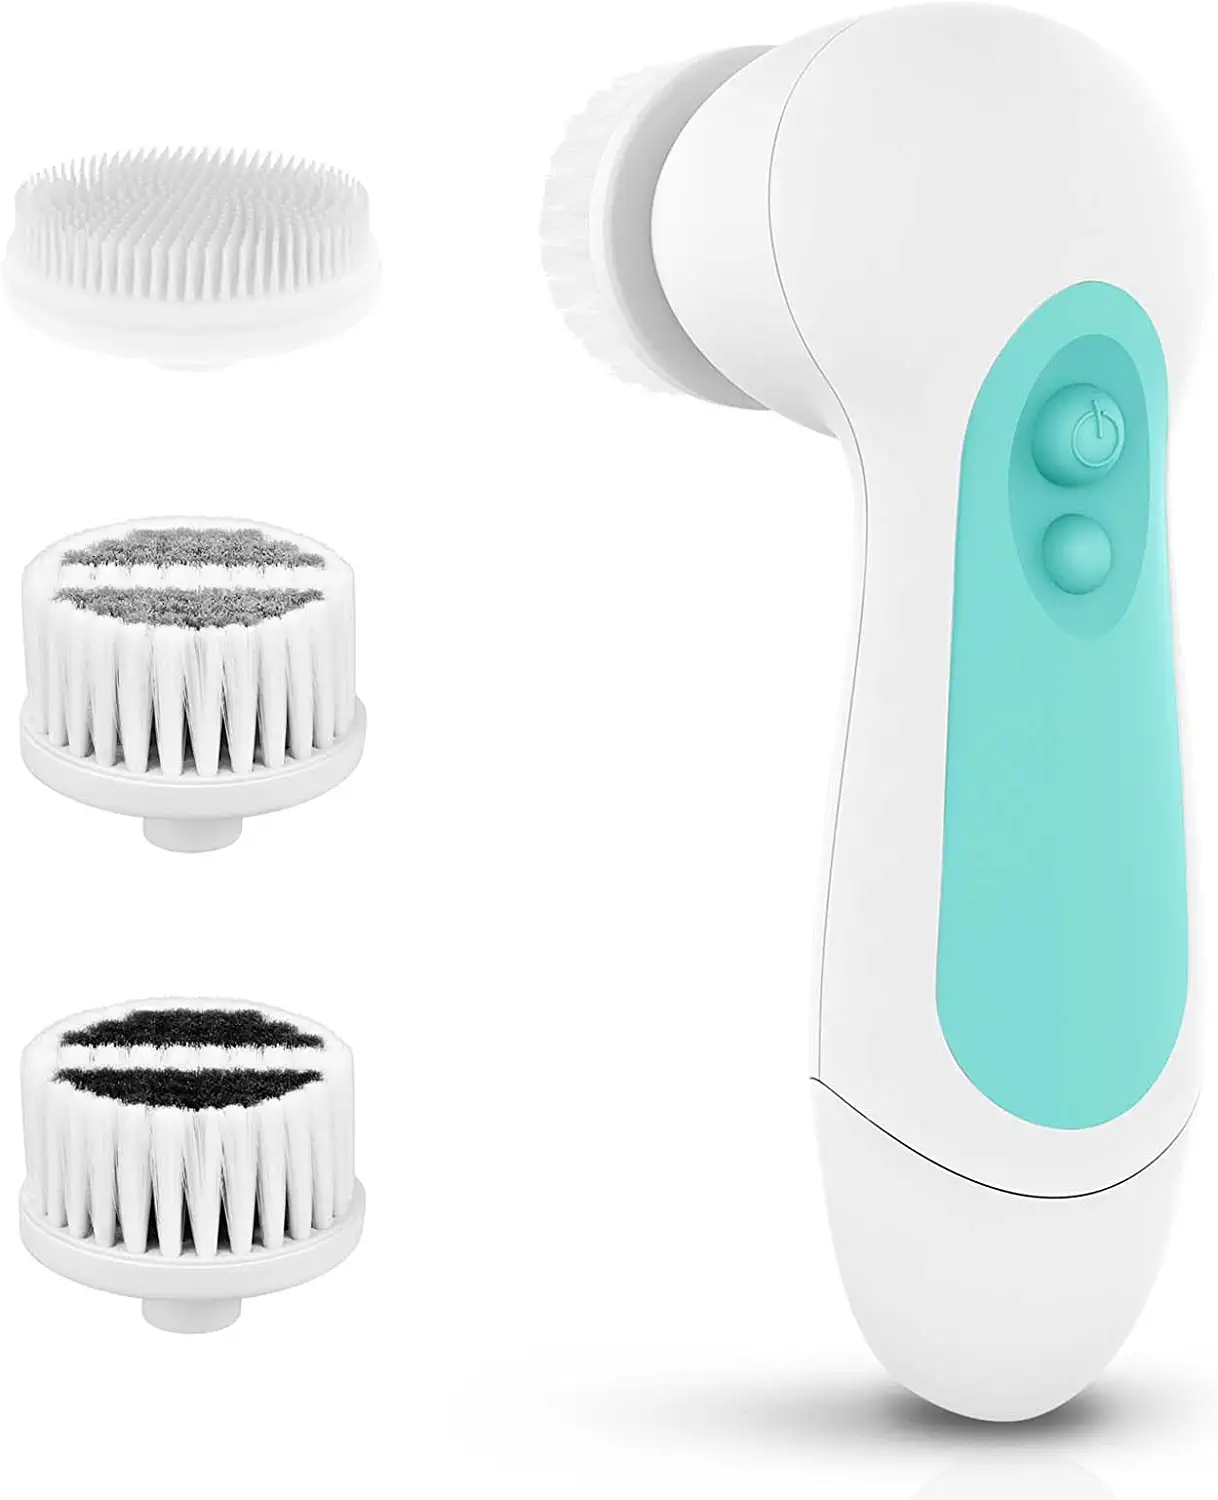 CLSEVXY 3 Brush Heads Facial Cleansing Brush